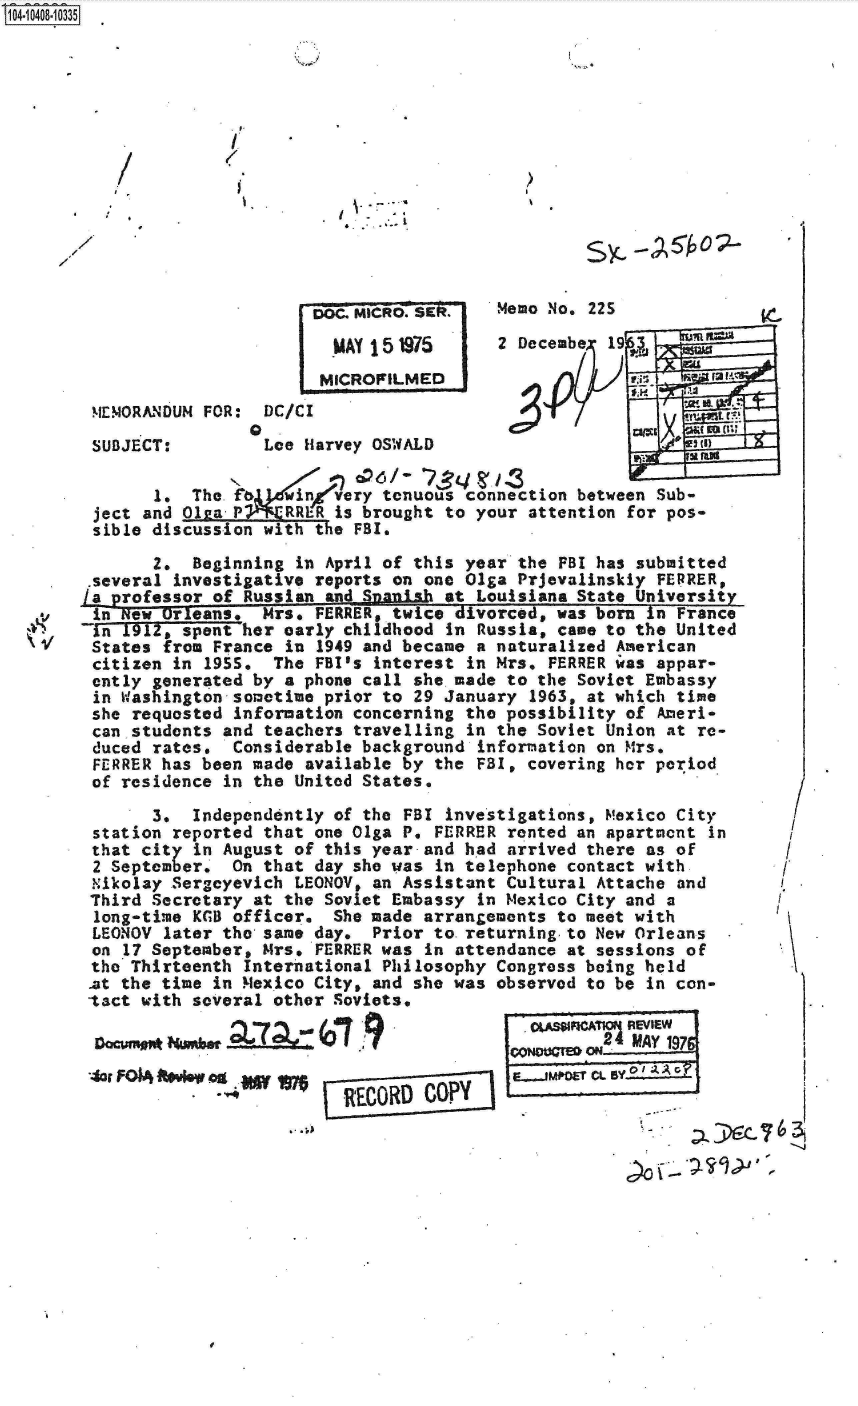 handle is hein.jfk/jfkarch19433 and id is 1 raw text is: S1O4~iO4O8~1O335


*~ - :2
4


s~c   A~o--


                      D~ MICR. R


                      MICROFILMED
!ENIORANDUM FOR: DC/C I


SUBJECT:


.
Lee  Harvey OSWALD


ecuo No~e ZZ3

Decembe-  19,


     2p~zJ;W x


       1.  The.      inevery  tenuous connection between Sub-
 ject and 01sa P RR'R is brought to your attention for pos-
 sible discussion with t e FBI.

       2.  Beginning in April of this year  the FBI has submitted
 .several investigative reports on one Olga Prjevalinskly FERRER,
La professor of Russian _and Snish  at Louisiana State University


inR -Orleans, Mrs. FERRER, twice divorced, was born In France
-in 1912, spent her early childhood in  Russia, came to the United
States  from France in  1949 and became a naturalized American
citizen  in l95S.  The FBI's interest  in Mrs. FERRER was appar-
cntly  generated by a phone call she made  to the Soviet Embassy
in  Washington sometime prior to 29 January  1963, at which time
she  requested information concerning the  possibility of Ameri-
can  students and teachers travelling  in the Soviet Union at re-
duced  rates.  Considerable background  information on Mrs.
FERRER  has been made available by the  FBI, covering her period
of  residence in the United States.


      3.  Independently  of the FBI investigations, Mexico City
station reported  that one Olga P. FERRER rented an apartment in
that city  in August of this year and had arrived there as of
2 September.  On  that day she was in telephone contact with
Nikolay Sergcyevich  LEONOV, an Assistant Cultural Attache and
Third Secretary  at the Soviet Embassy in Mexico City and a
long-time KGB officer.   She made arrangements to meet with
LEONOV  later the same day. Prior  to. returning to New Orleans
on 17 September, Mrs.  FERRER was in attendance at sessions of
the Thirteenth  International Philosophy Congress being held
at the time in Mexico  City, and she was observed to be in con-
tact with several  other Soviets.


9ouW0            o                             MAY 1976




                 RECORD   COPy I


0


I
(
I


,1


  /
  /
r


I,)


/


I .


-S


I I -


2


